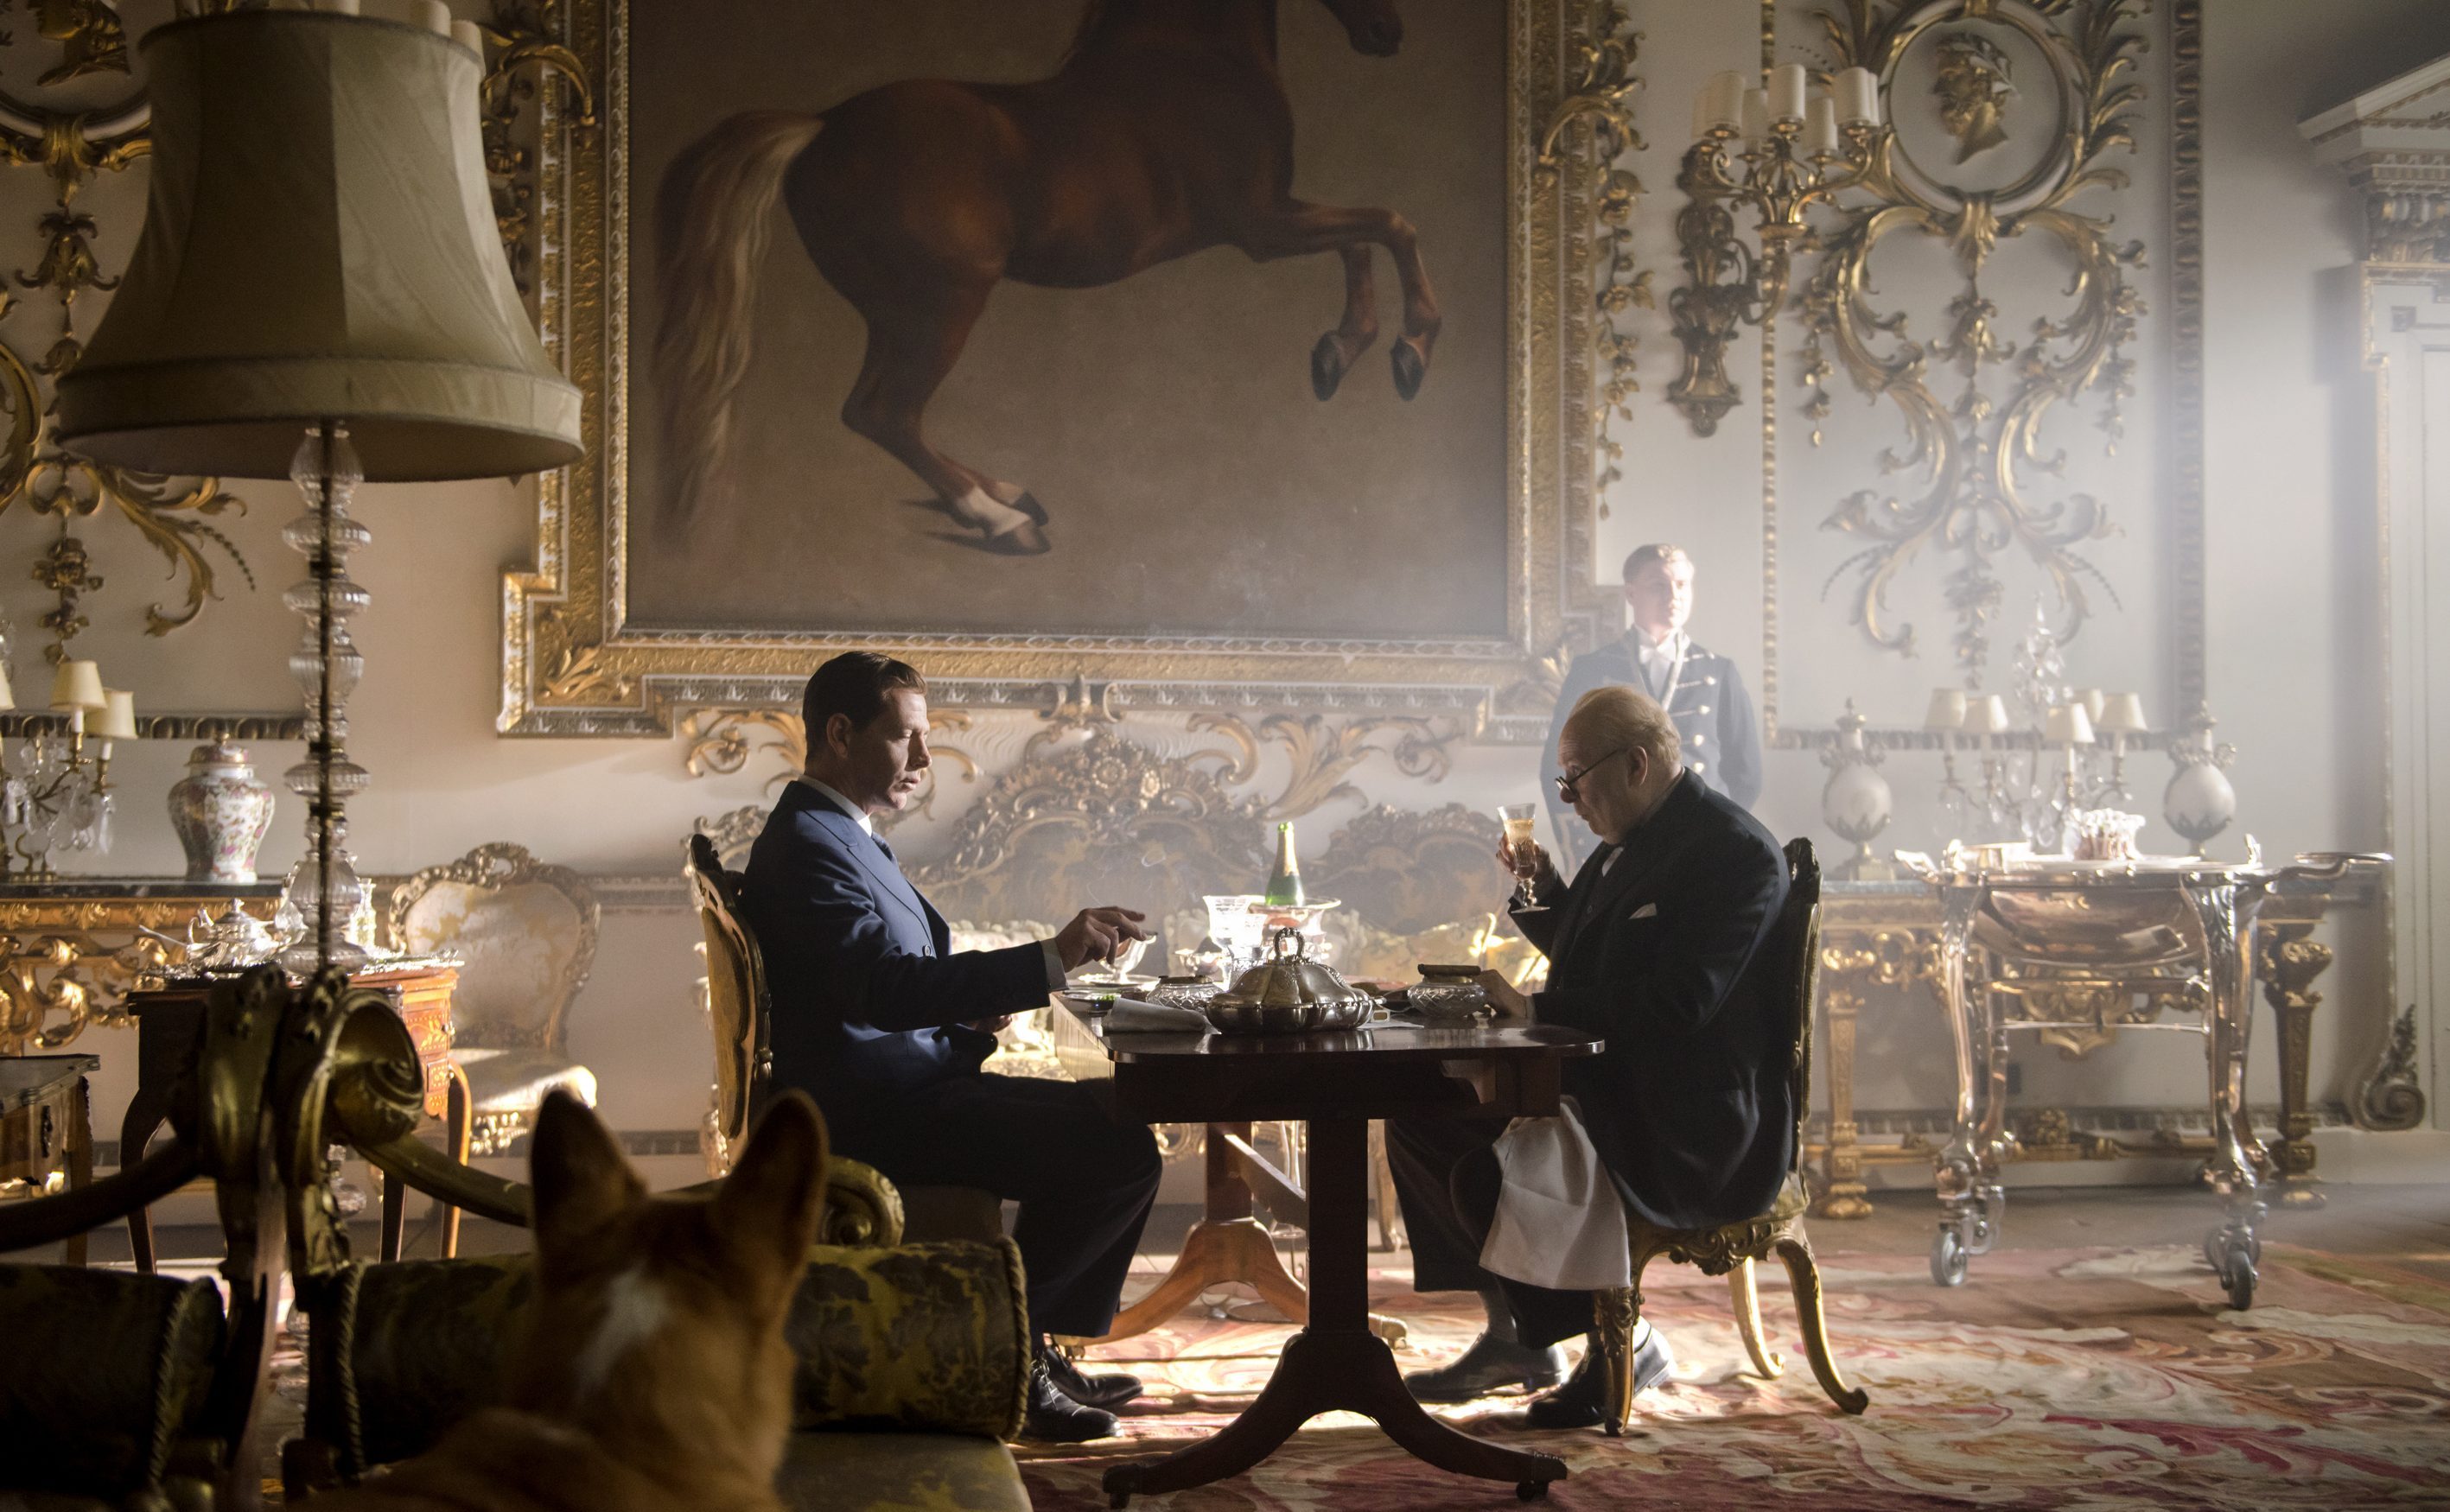 Darkest Hour follows Winston Churchill in the days leading up to the war. Set in his quiet, mahogany quarters and the loud chambers of arguing politicians. Dark, heavy woods and leather-bound books were the films driving interior aesthetic.